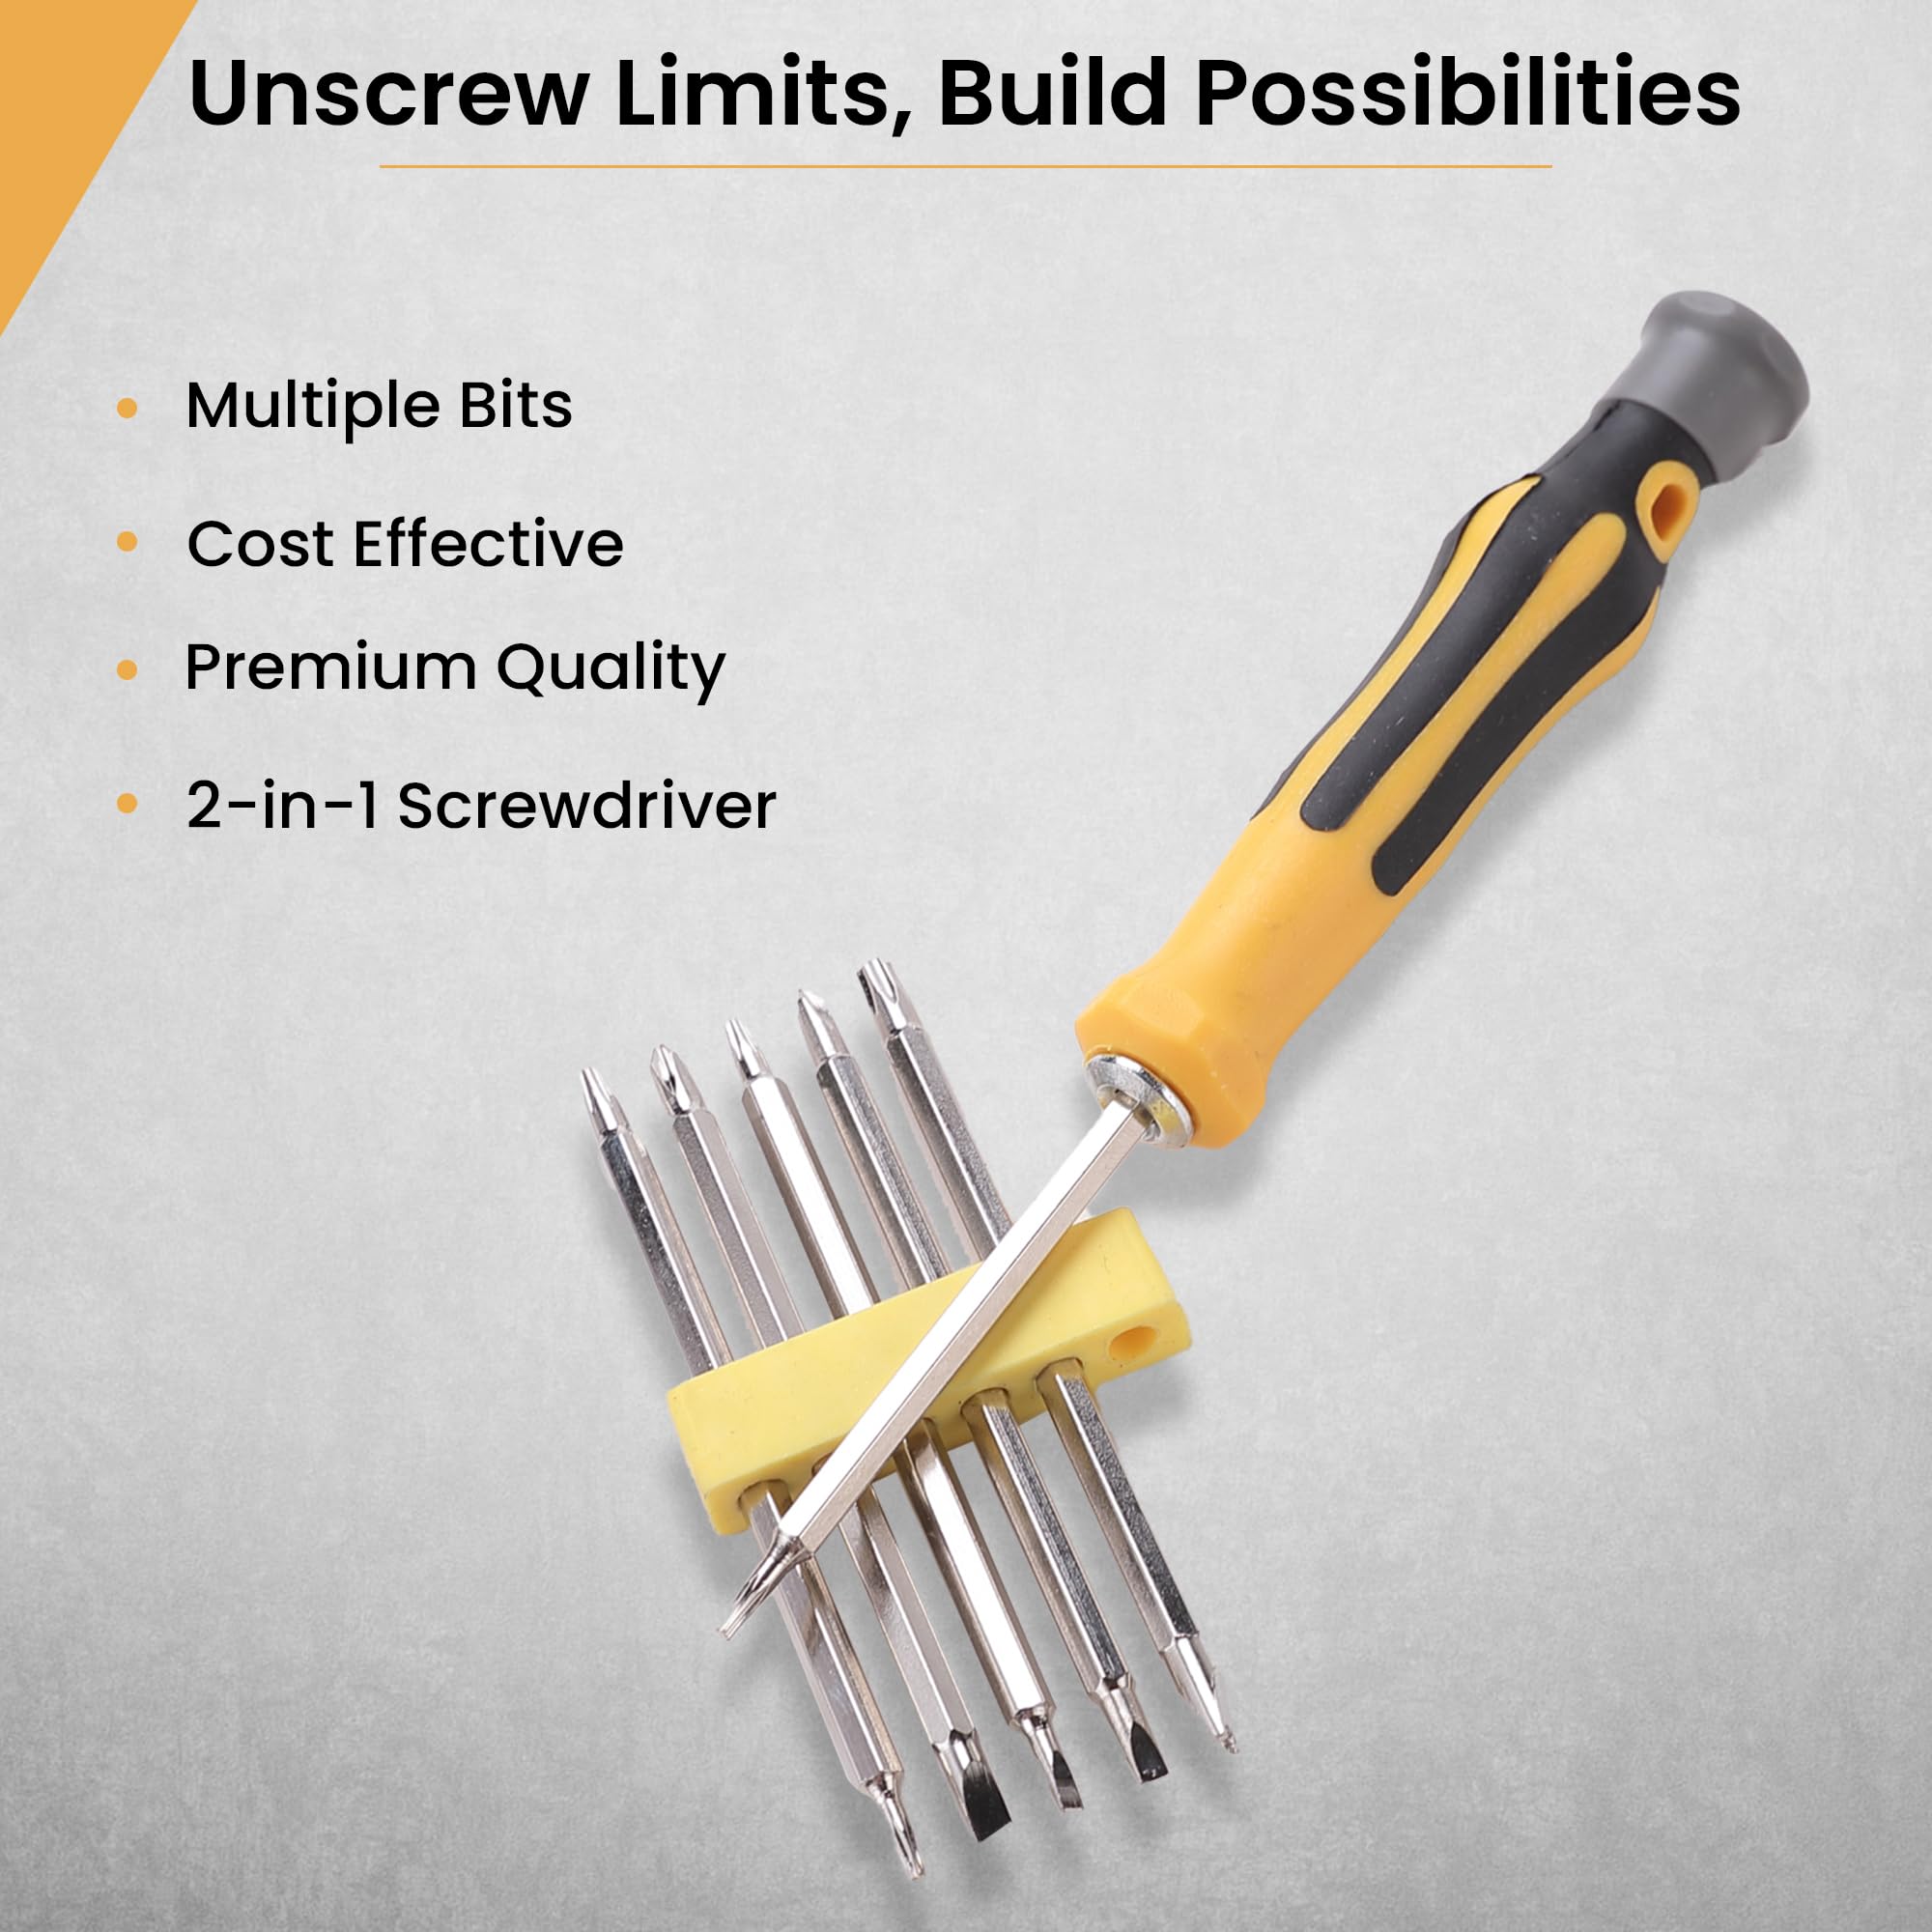 Cheston 12-in-1 Screwdriver Set | Interchangeable Bars blades 12pc Screwdriver for Home Long Blades Repair Compact Kit for Fixing Electronics, Laptops, Machines PC | Multipurpose Hand Tool Kit